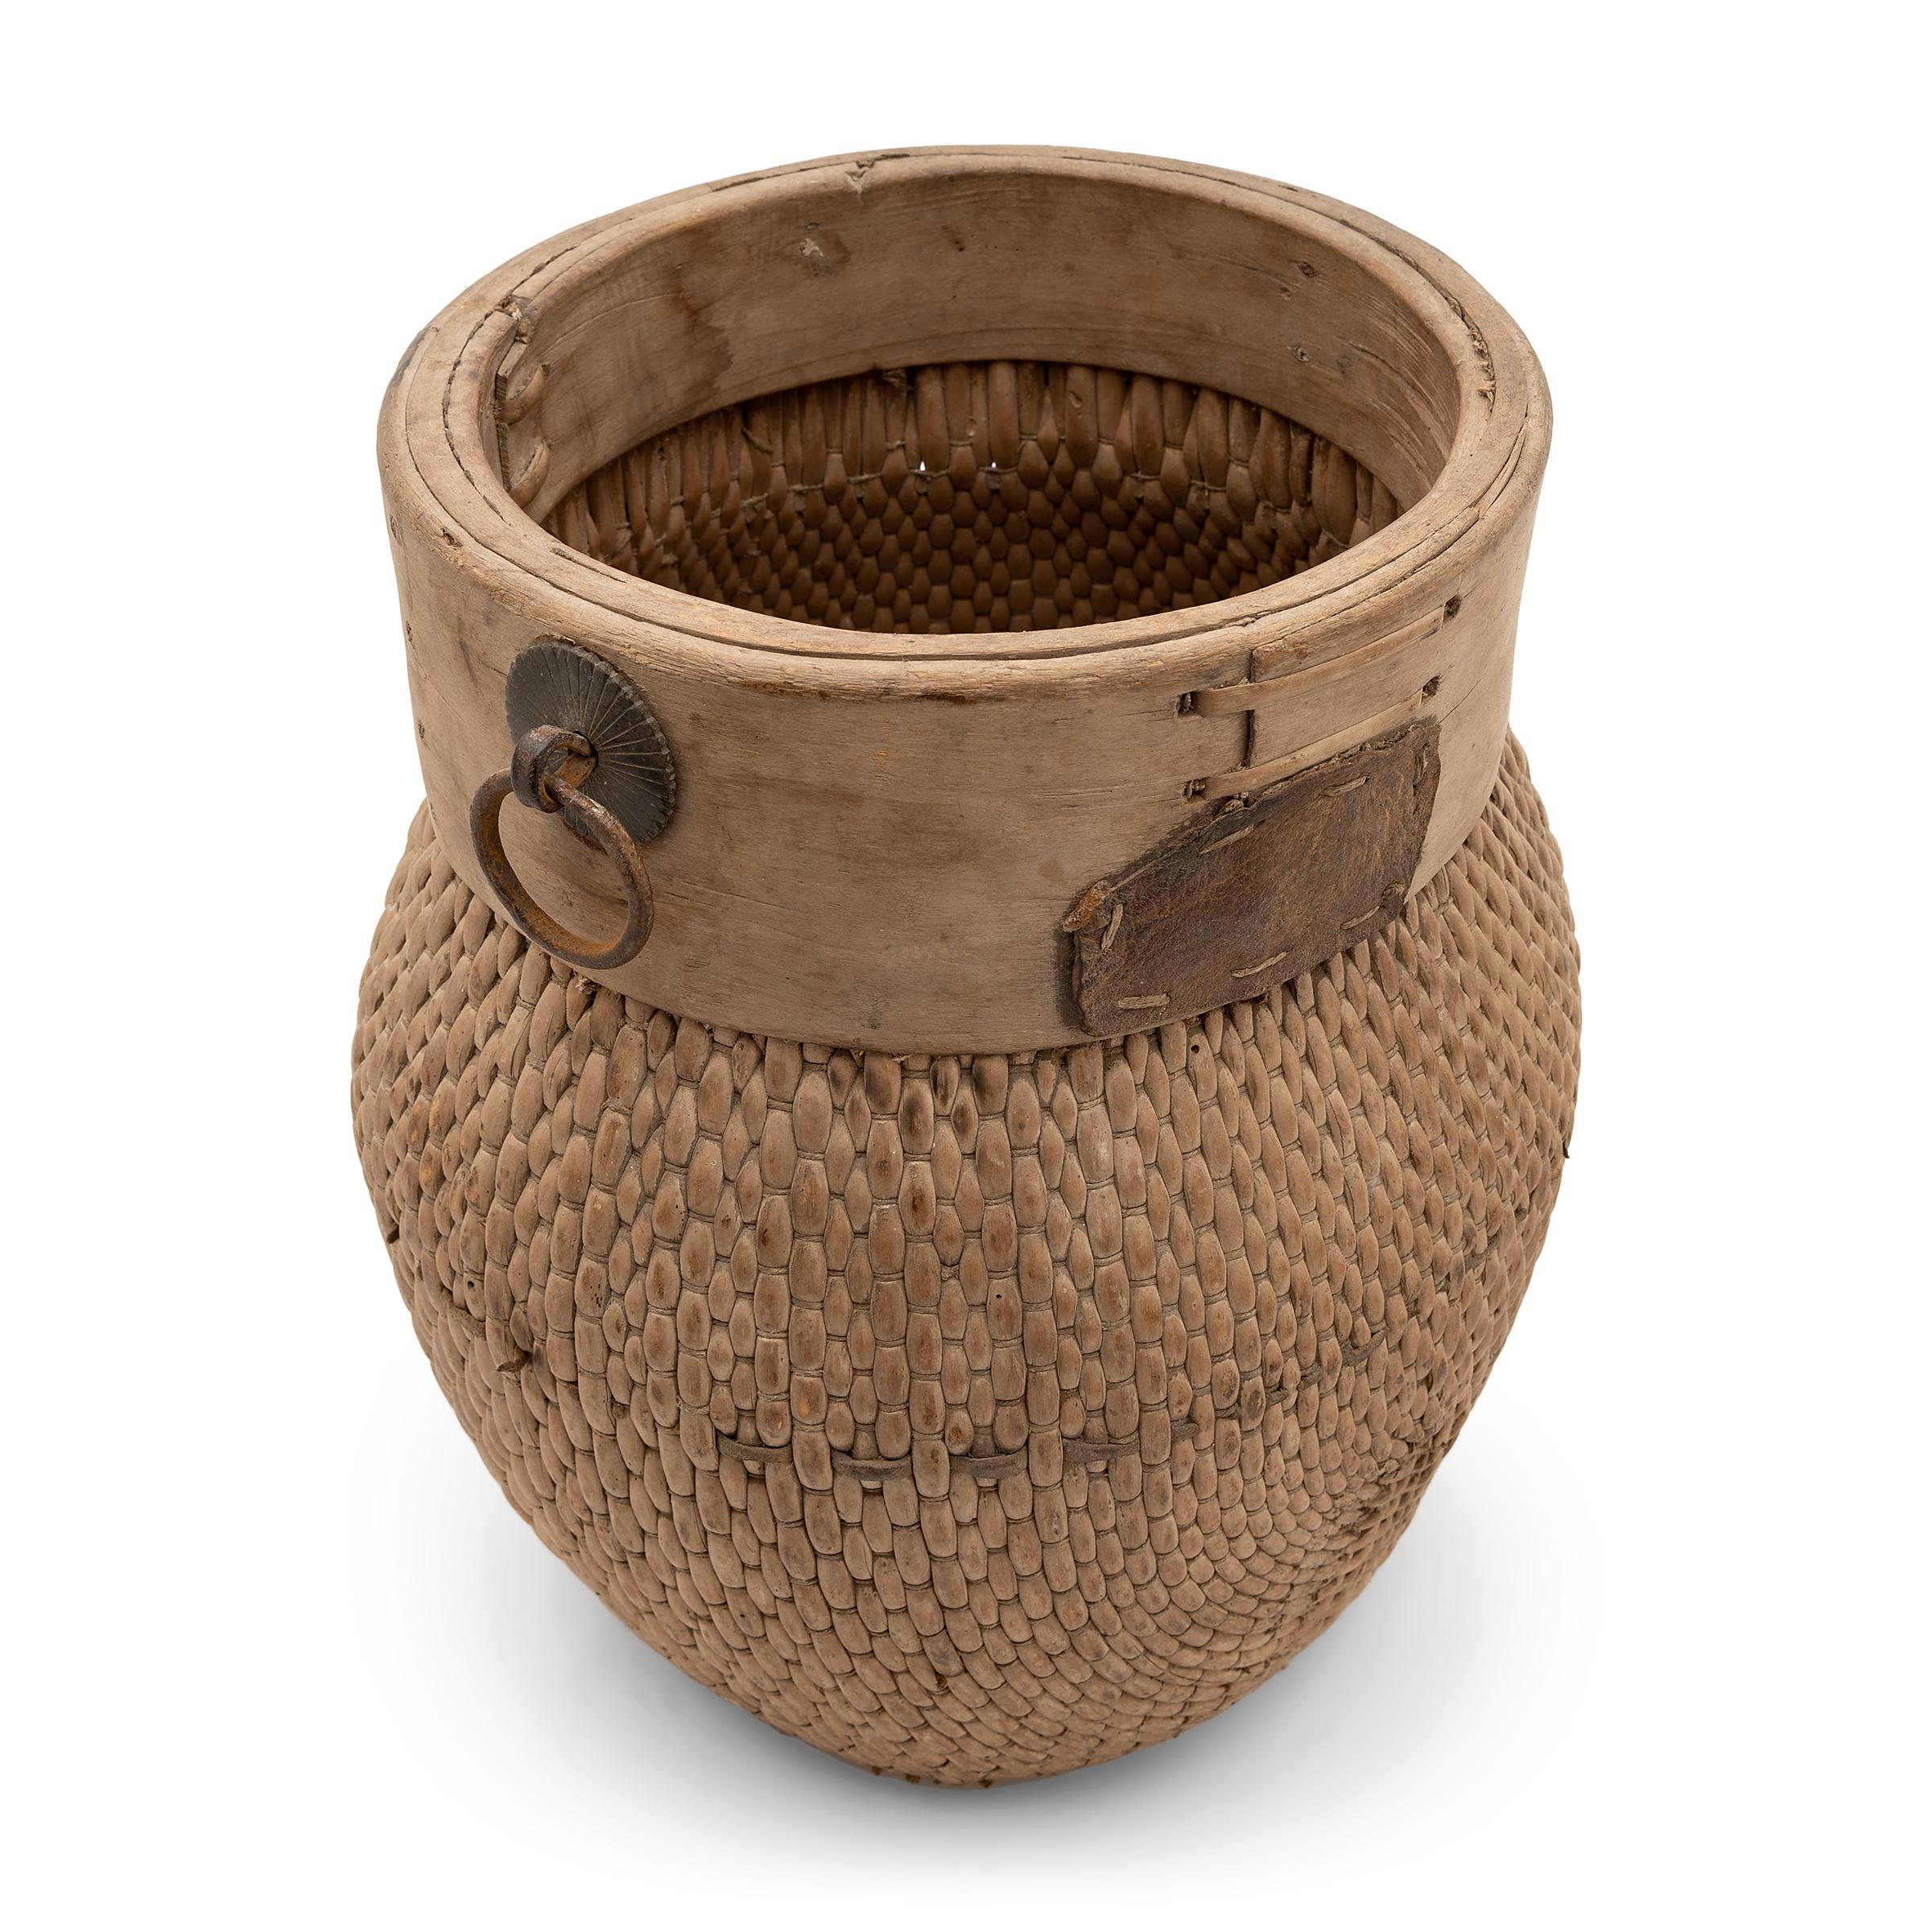 Rustic Chinese Woven River Basket, circa 1900